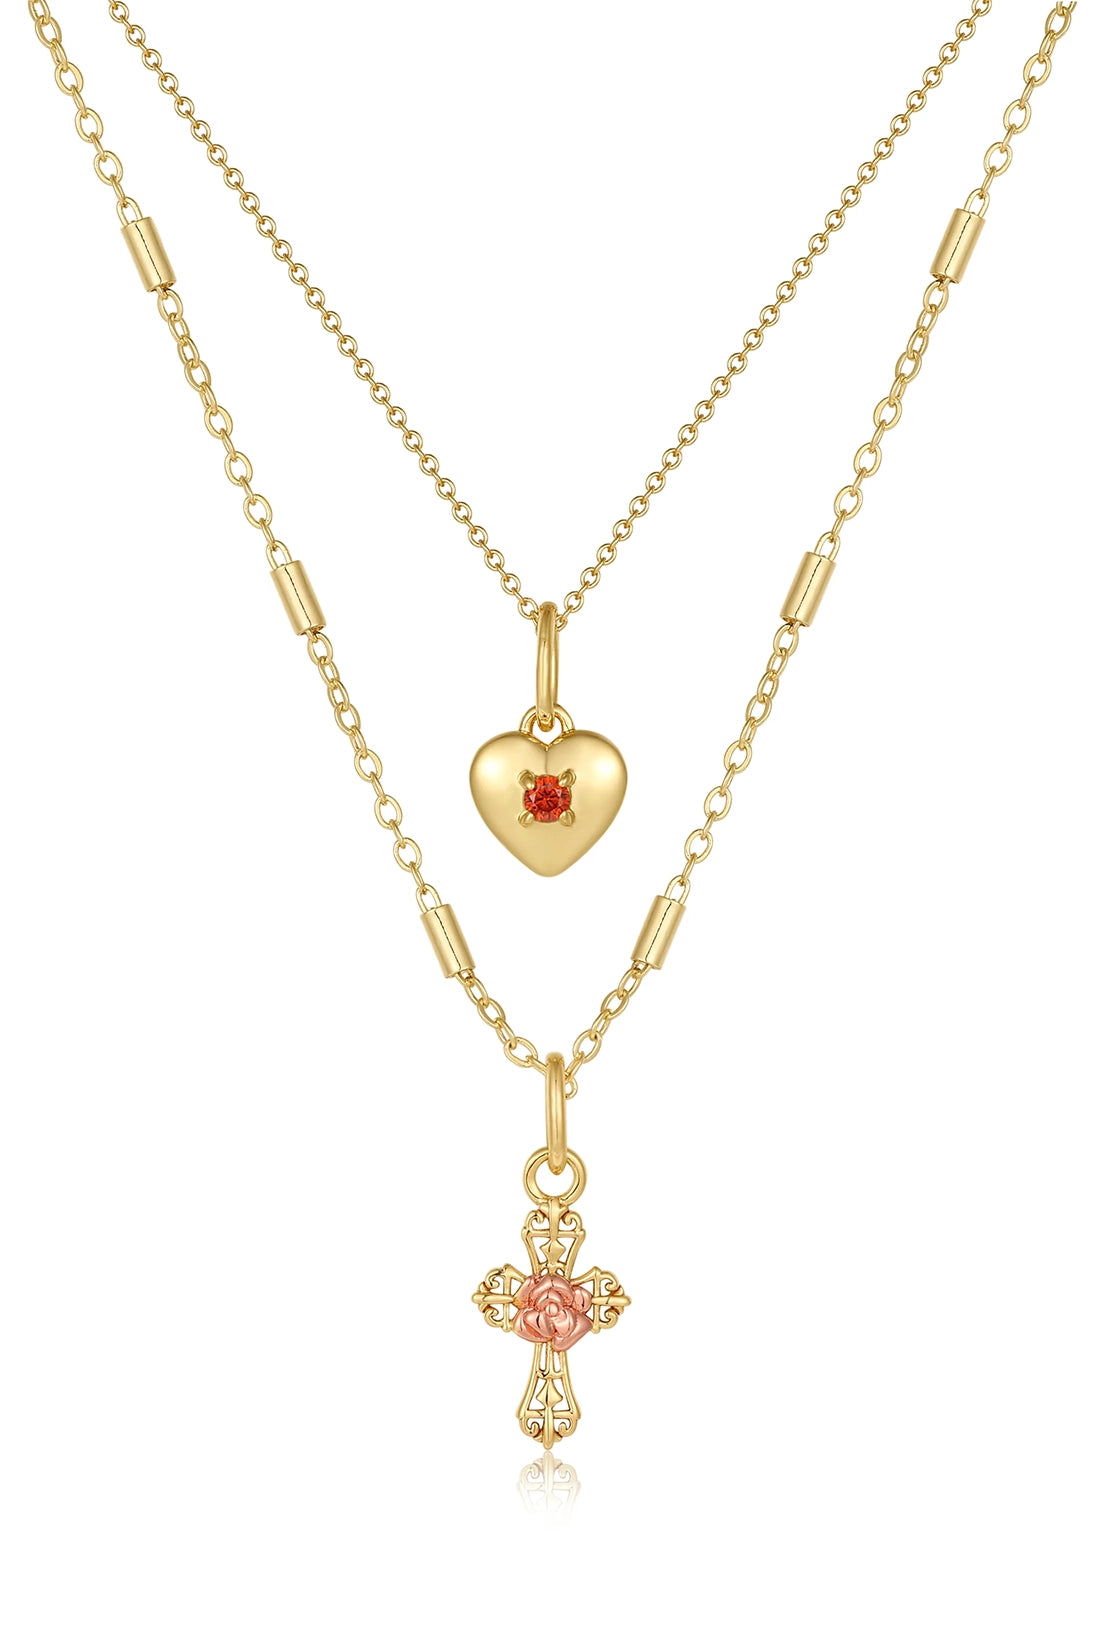 The Cross My Heart Charm Necklace - Gold